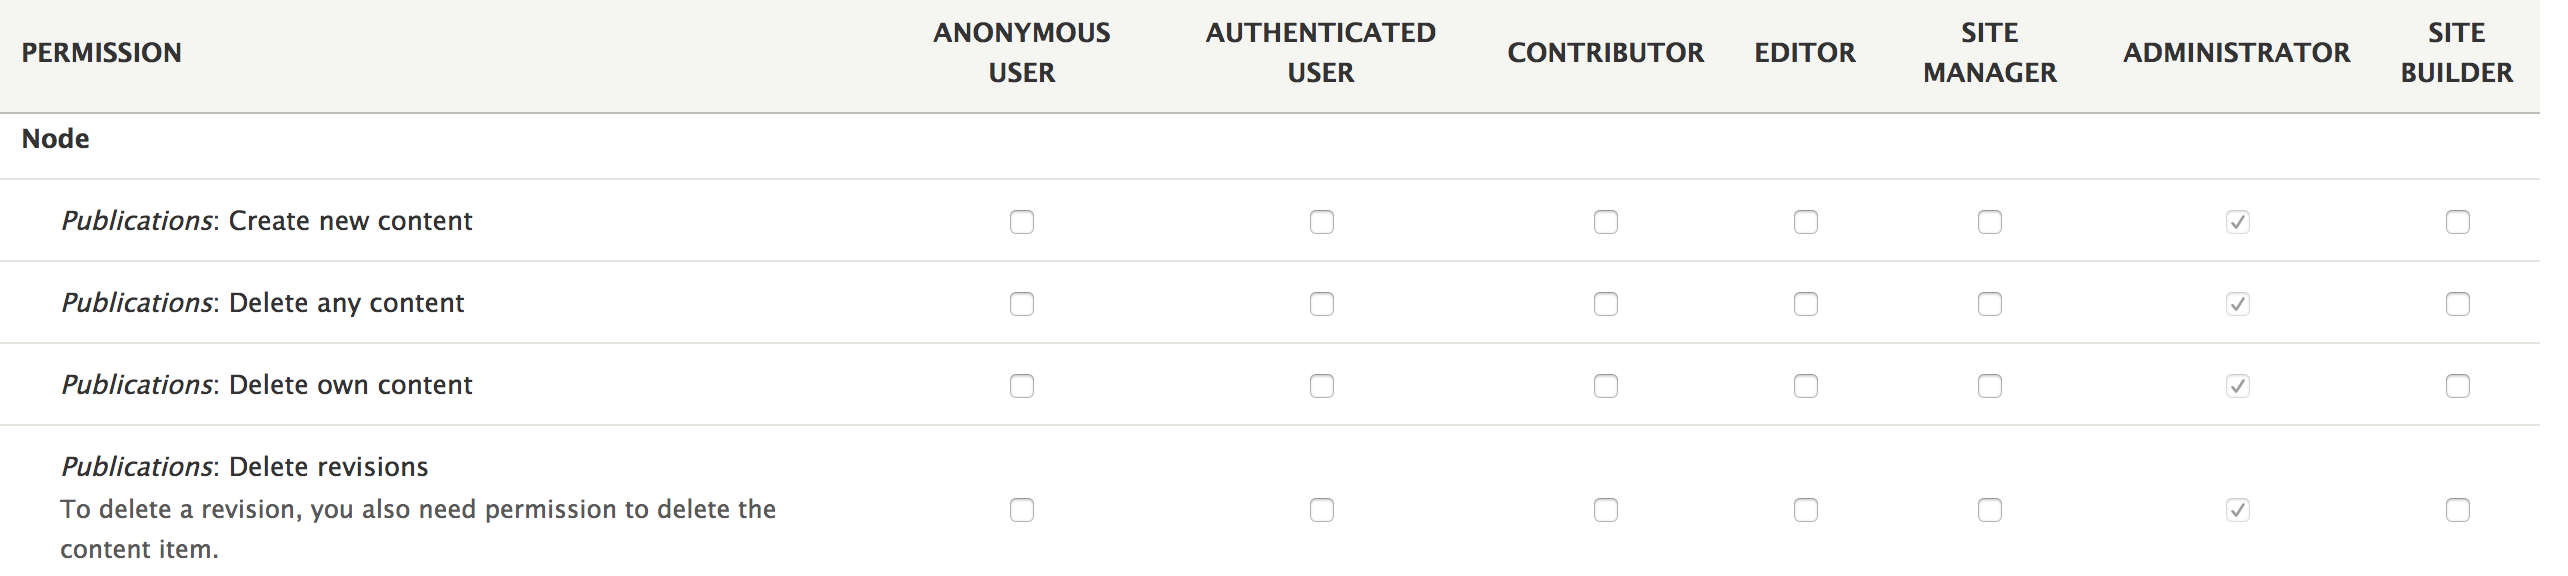 Screenshot of the Node section of the permissions panel, displaying the roles across the top and along the left side the available permission options. Checkboxes allow for enabling of access.